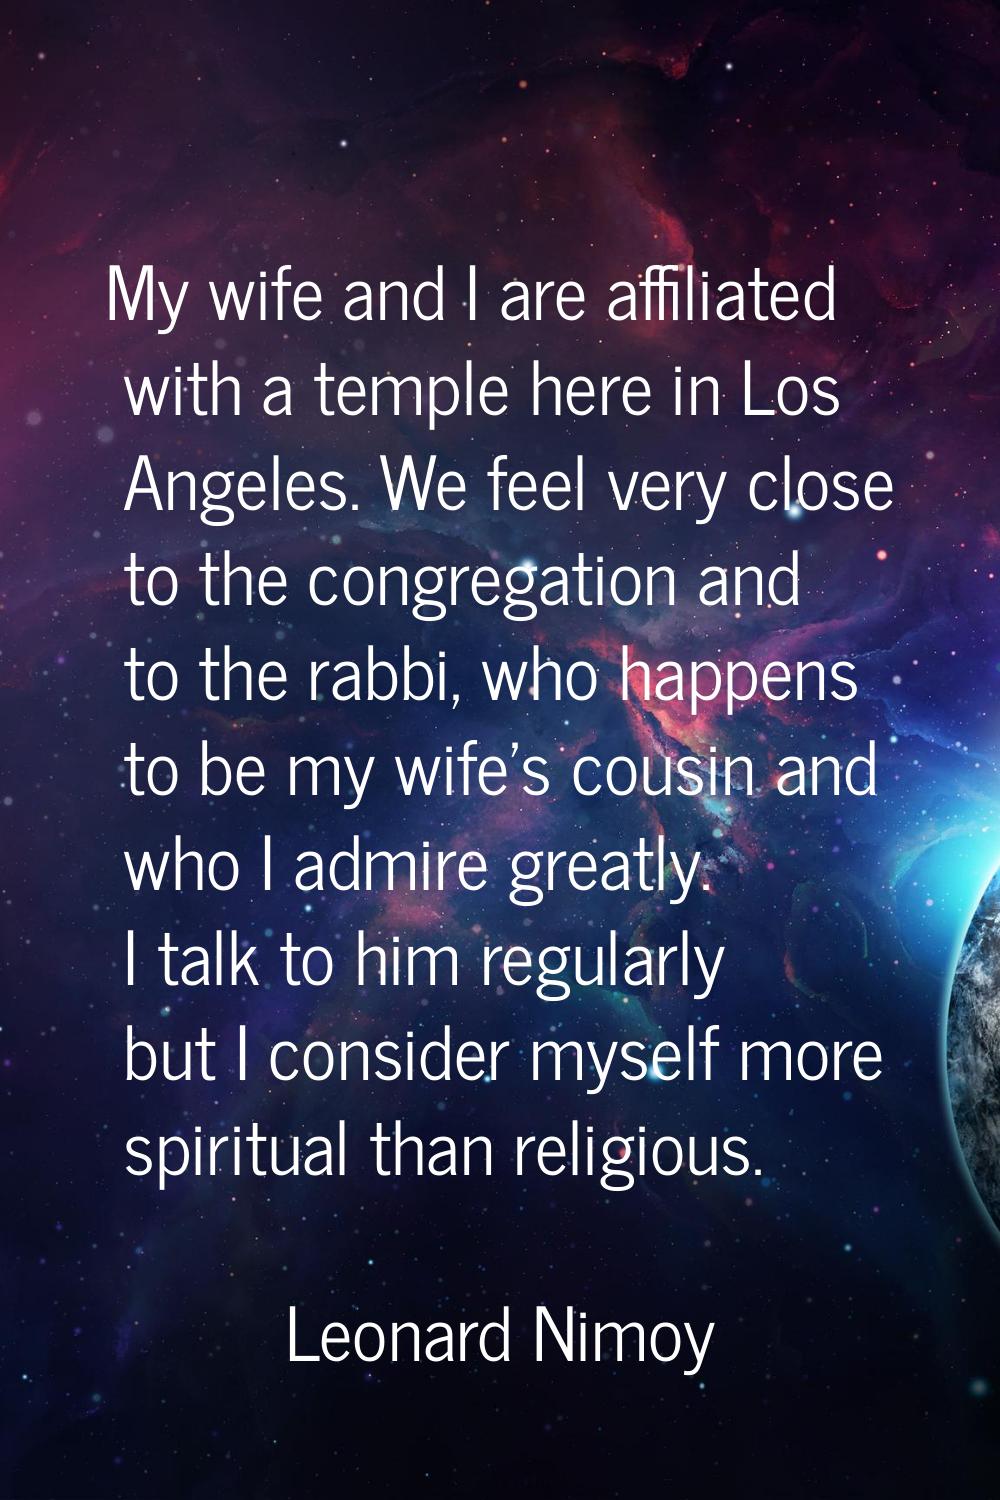 My wife and I are affiliated with a temple here in Los Angeles. We feel very close to the congregat